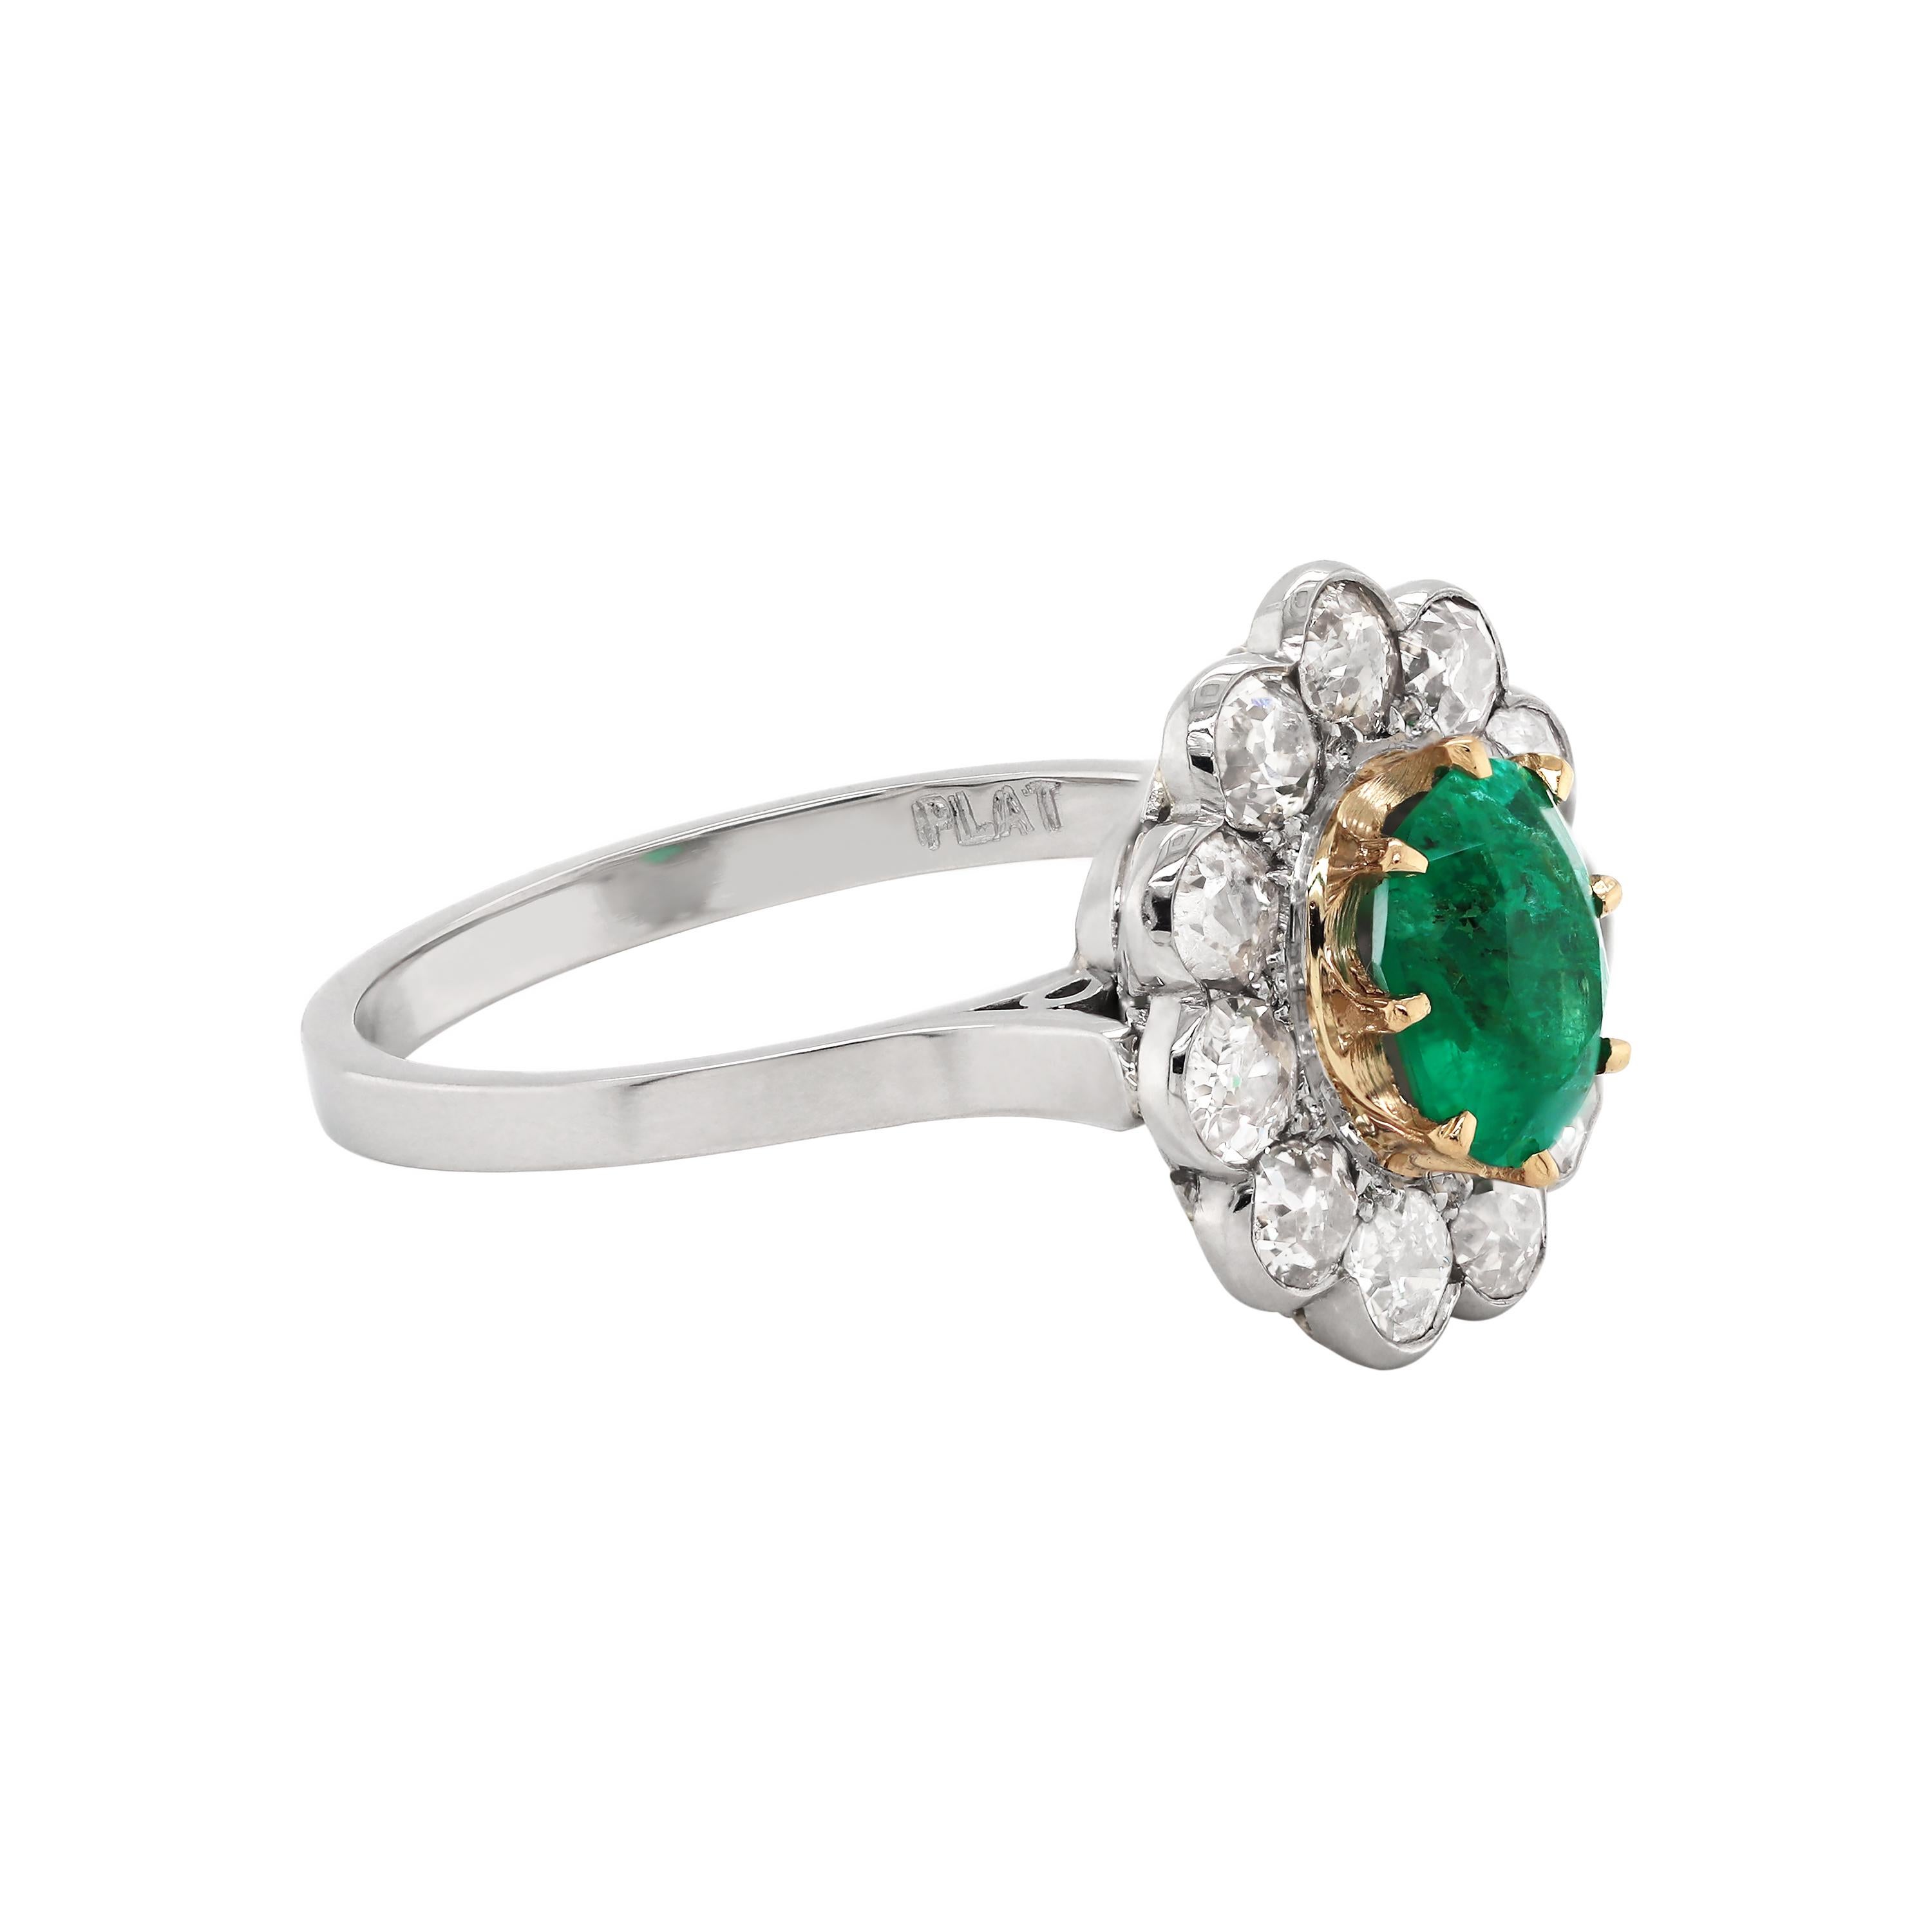 This beautiful hand made emerald and diamond coronet cluster ring features an oval shaped emerald in the centre, mounted in an open back, 18ct yellow gold claw setting, with an approximate weight of 1.00 carat. The emerald is surrounded by eleven